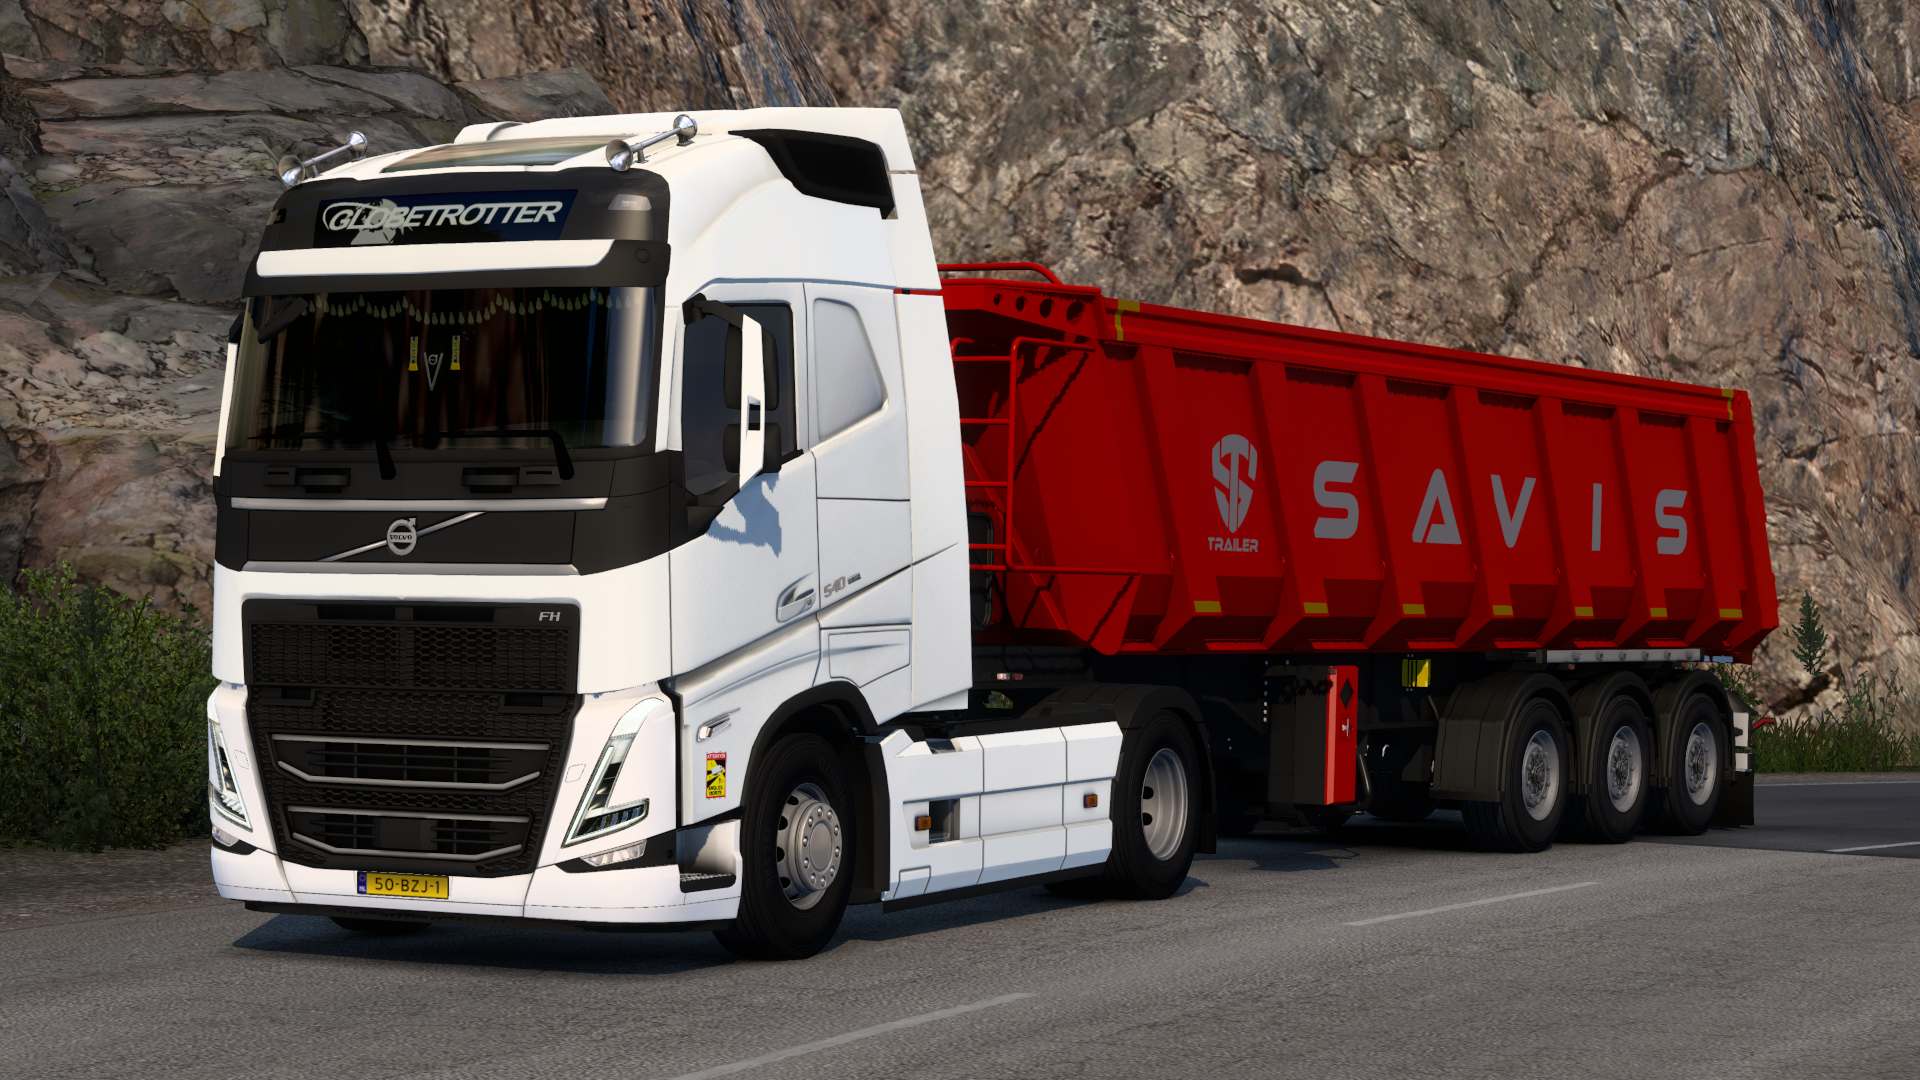 Volvo FH5 by Zahed Truck v2.1.4 1.48 - 1.49 